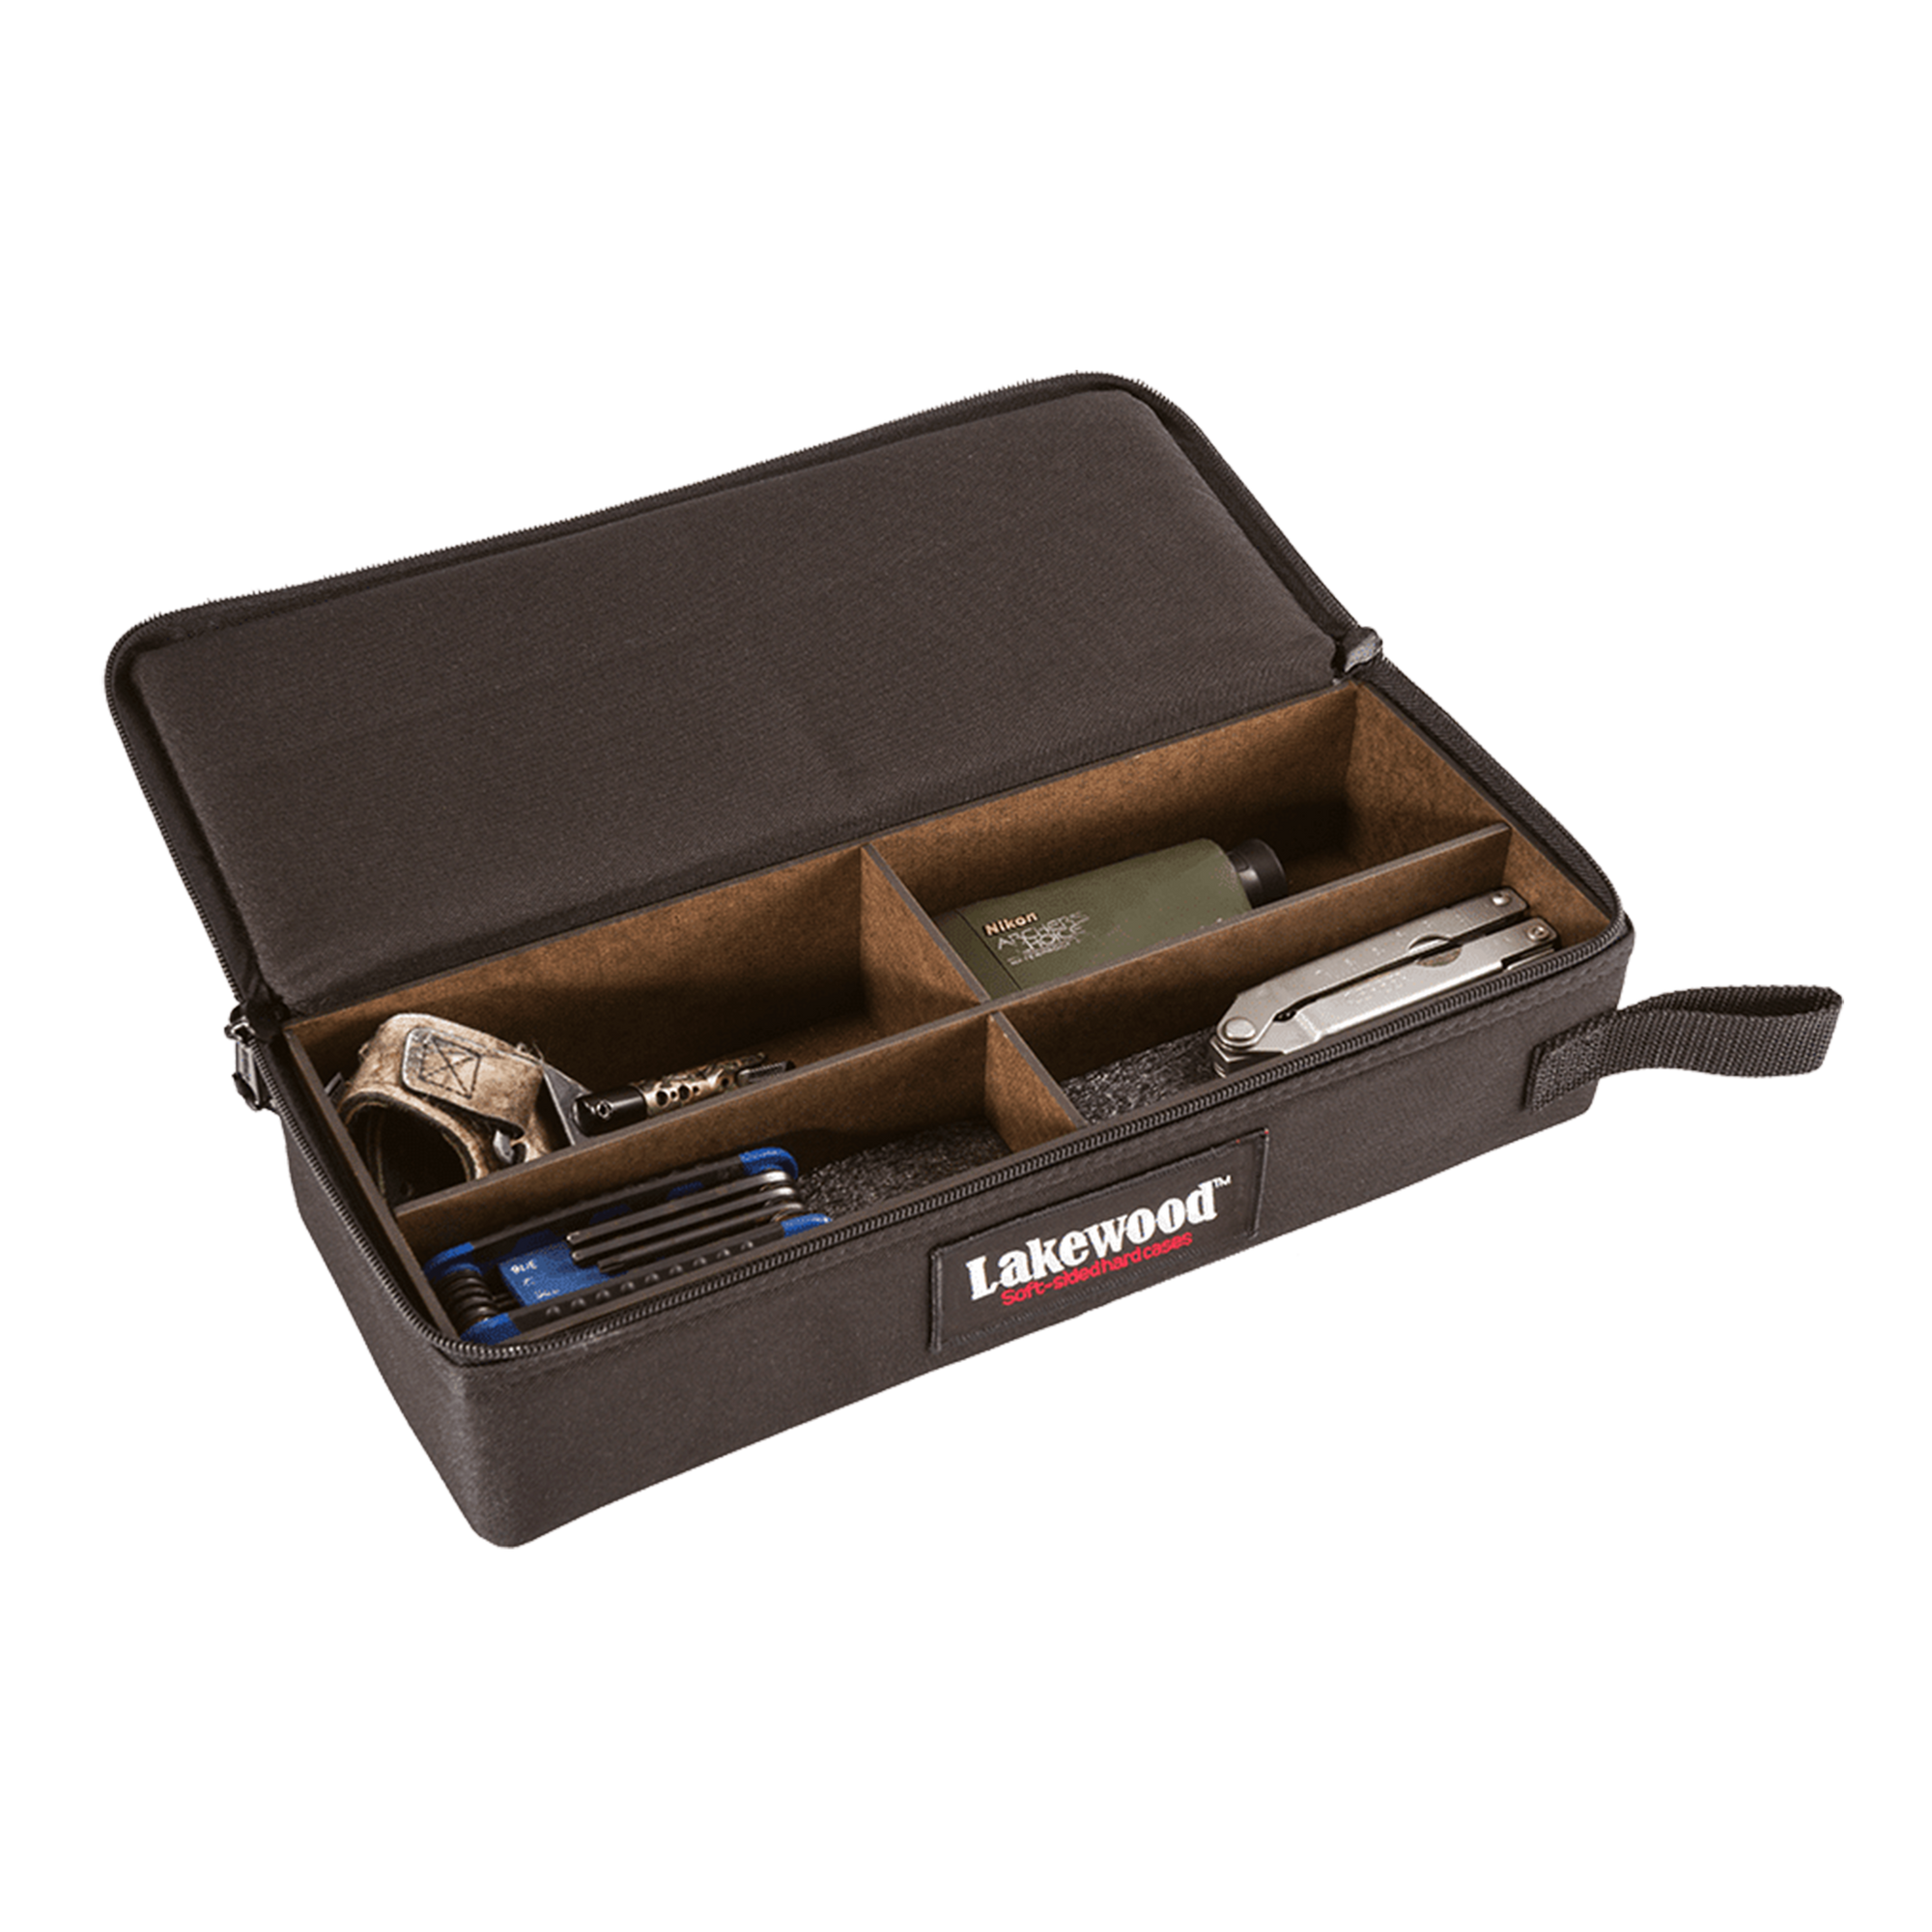 Lakewood Products Archery Accessory Case is designed to fit into the storage compartment of the bow or crossbow cases or can be used separately to hold your broadheads, field tips, wrenches and other bow accessories!